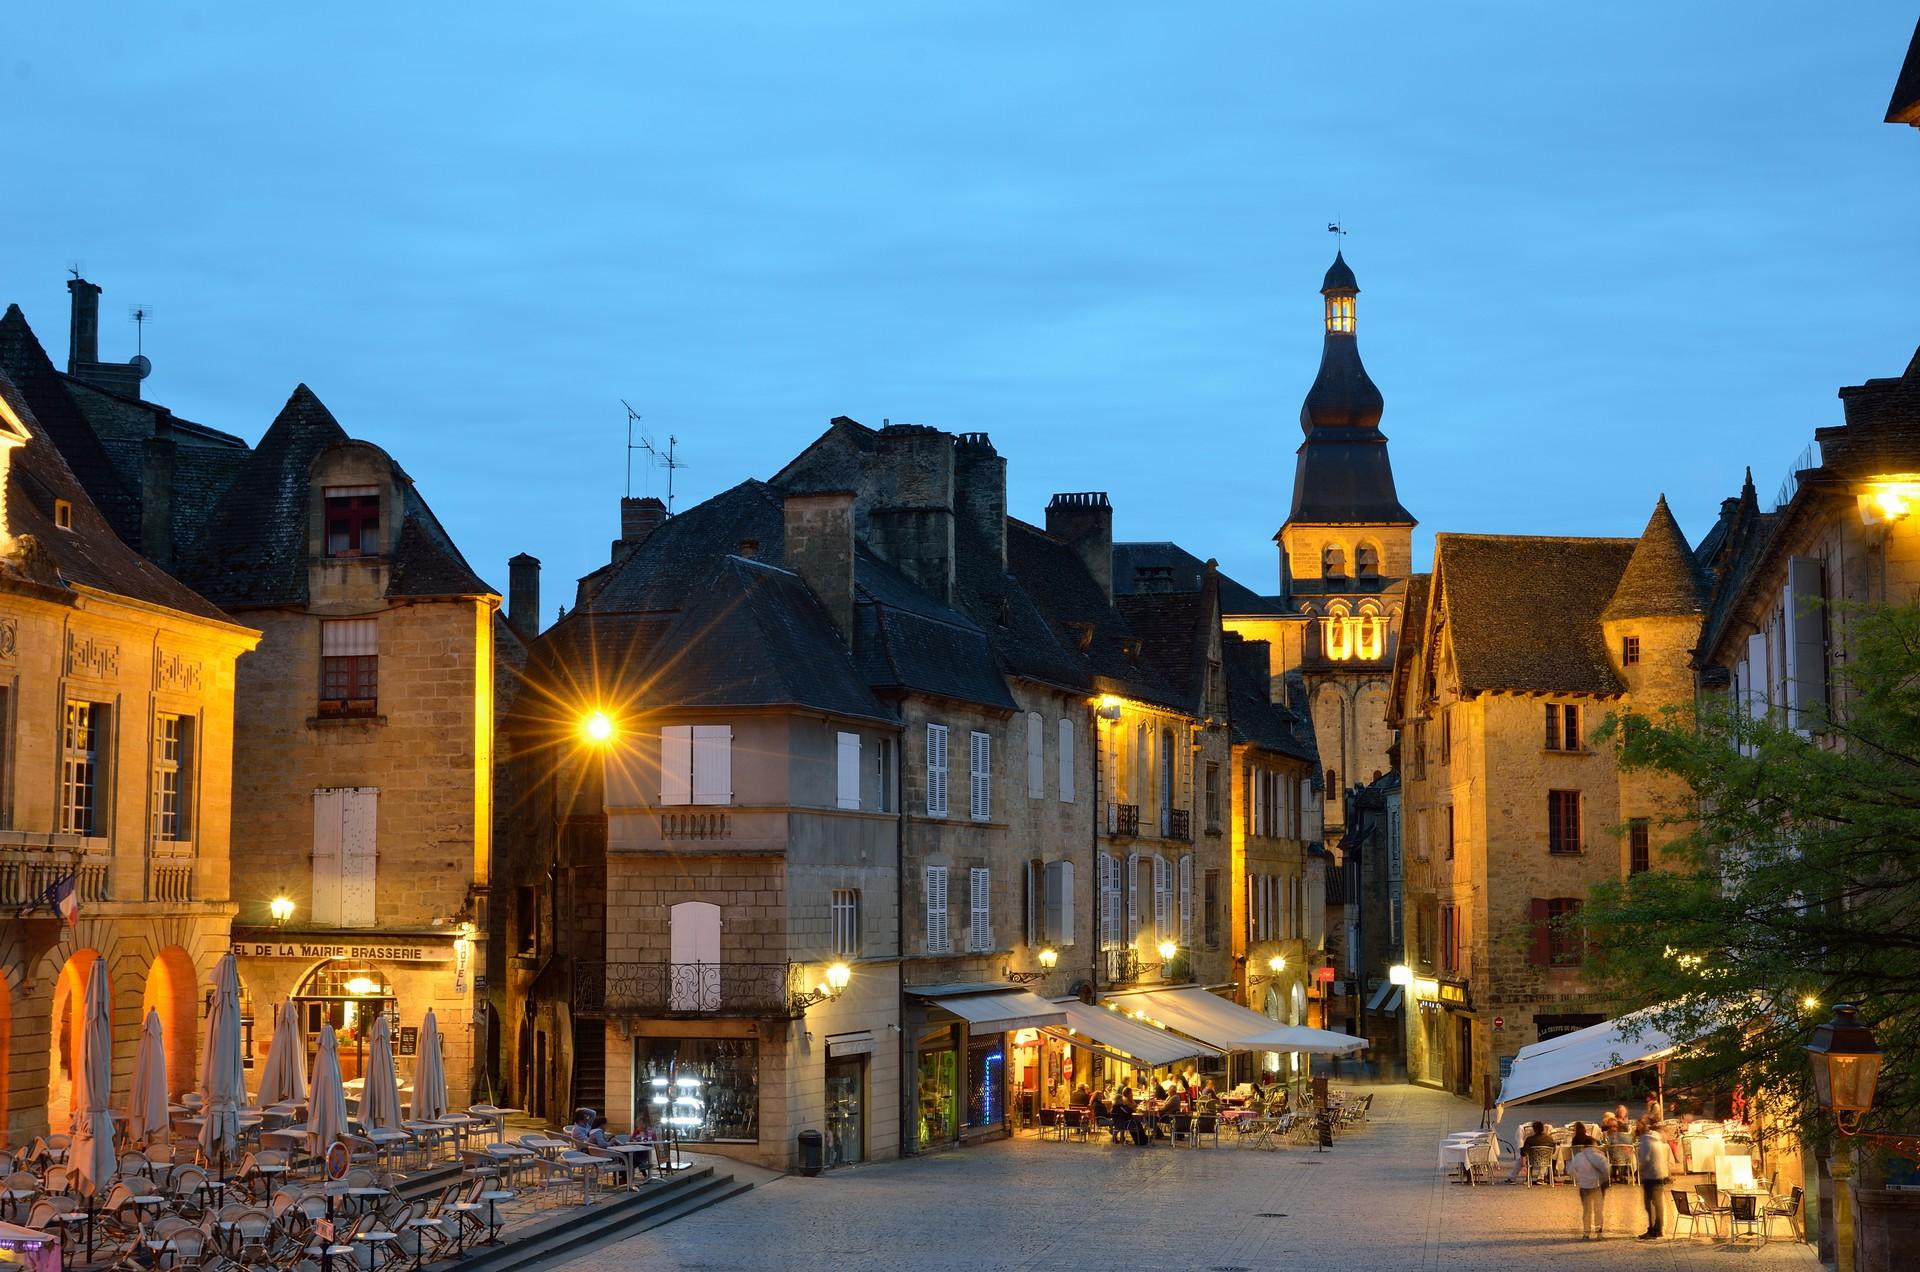 City square in Sarlat-la-Canéda at sunset time